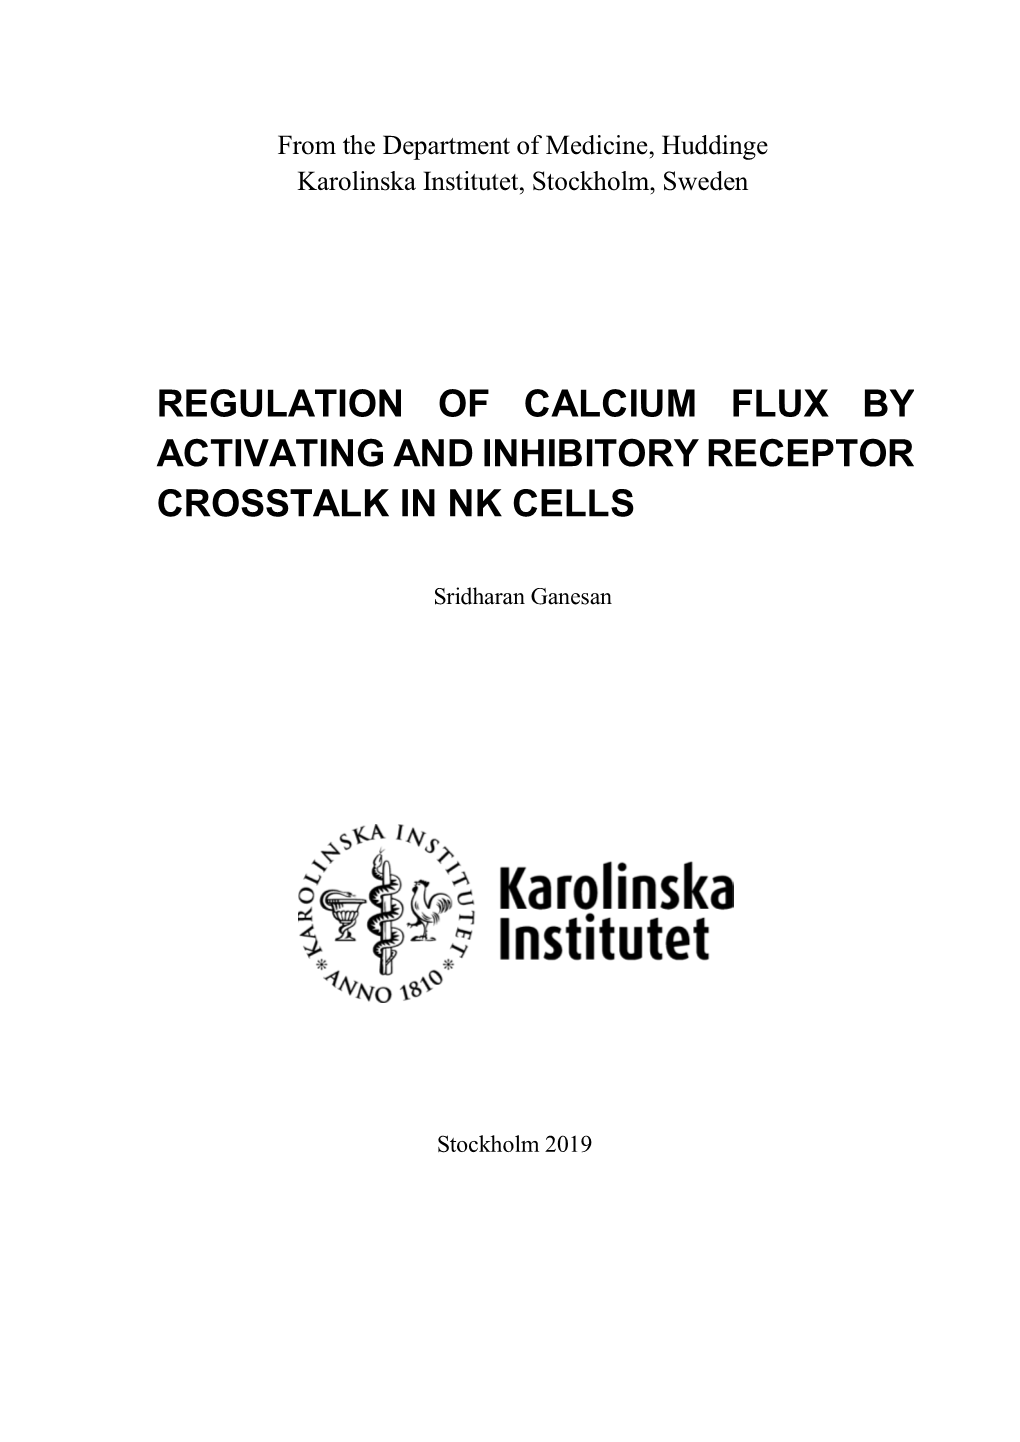 Regulation of Calcium Flux by Activating and Inhibitory Receptor Crosstalk in Nk Cells